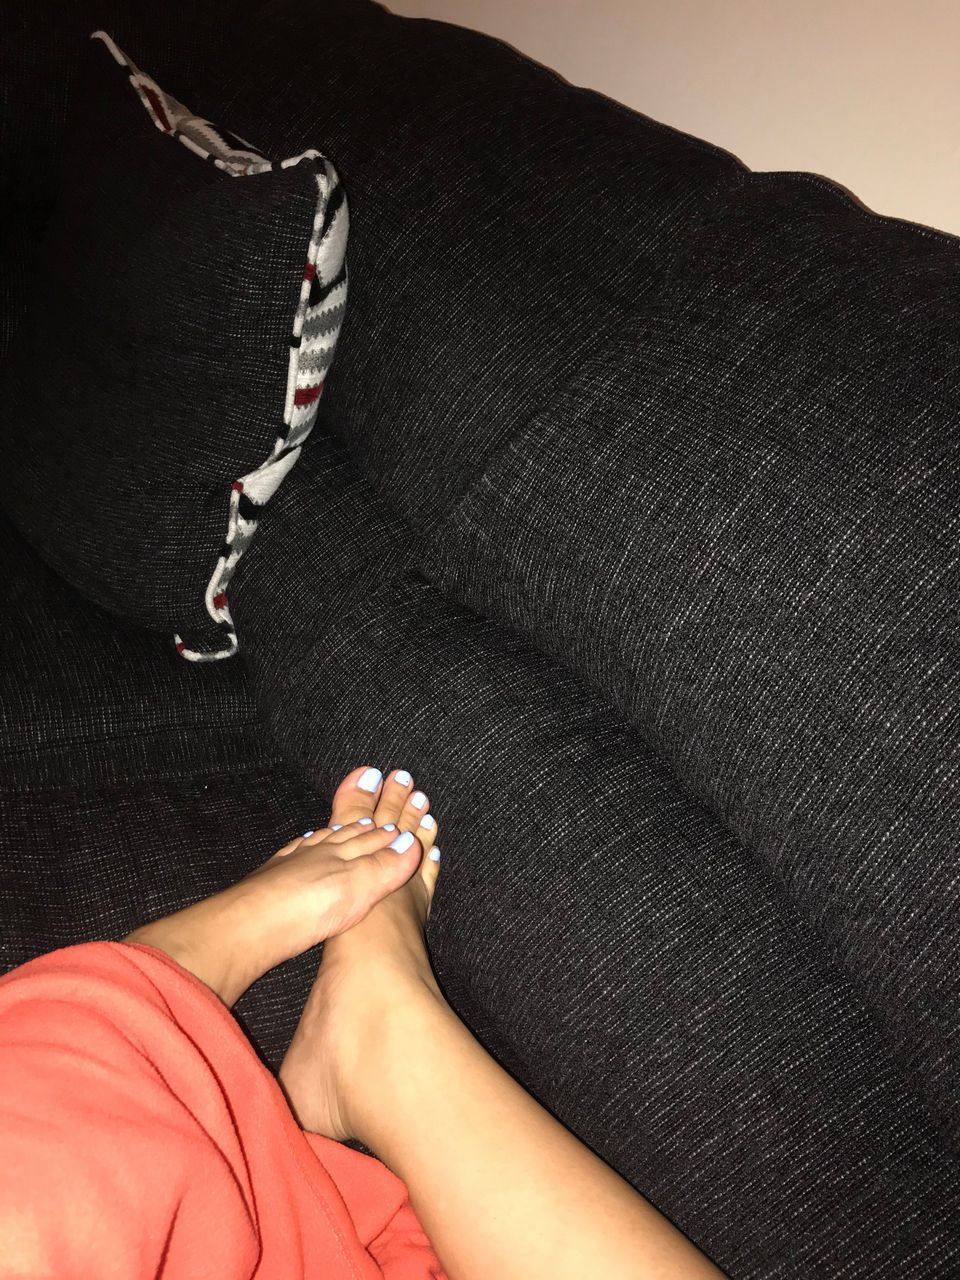 Violet Martinez Chilling On The Couch